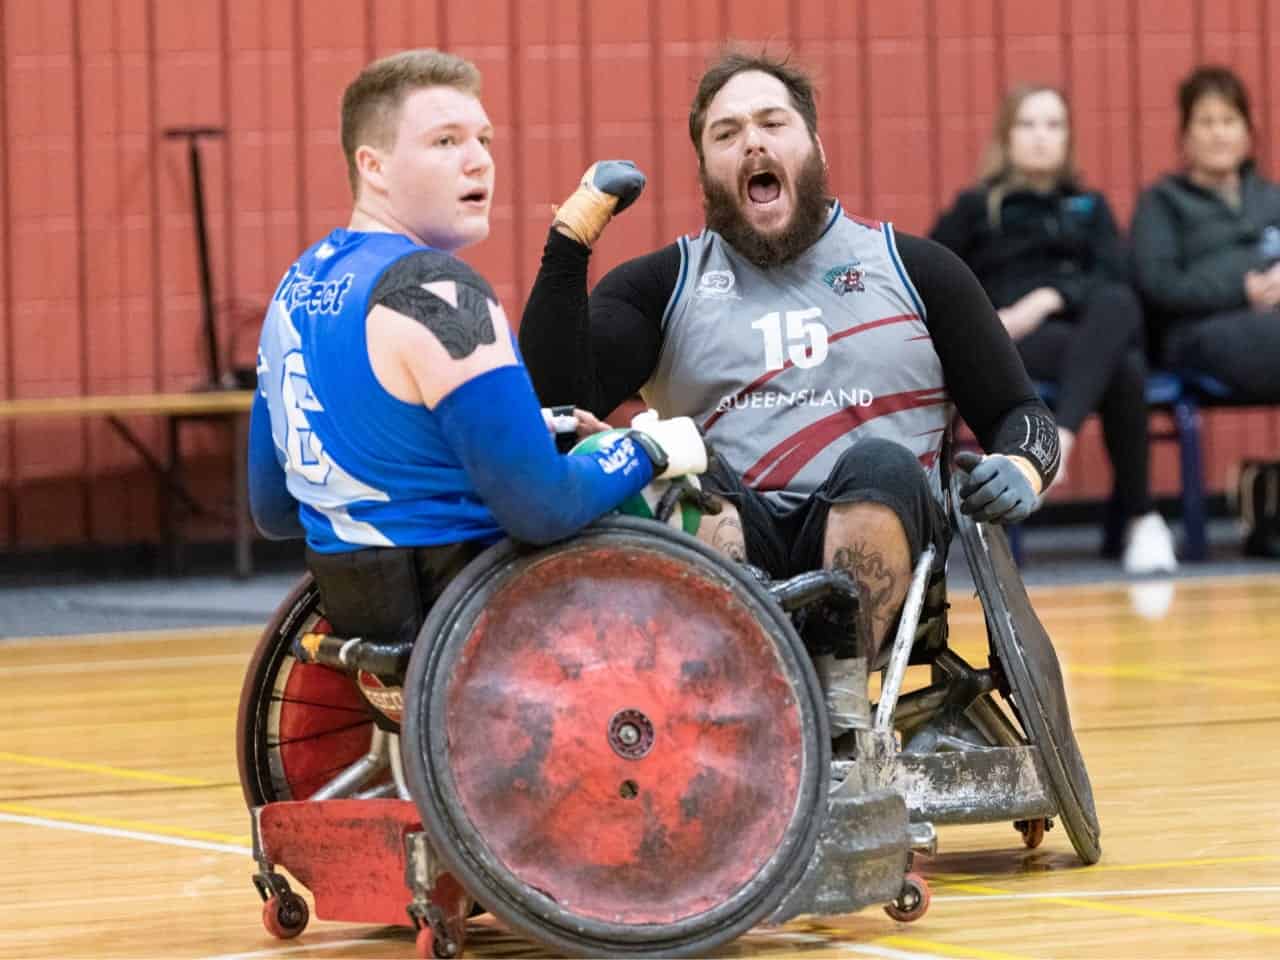 A wheelchair rugby player celebrates their victory after a match.